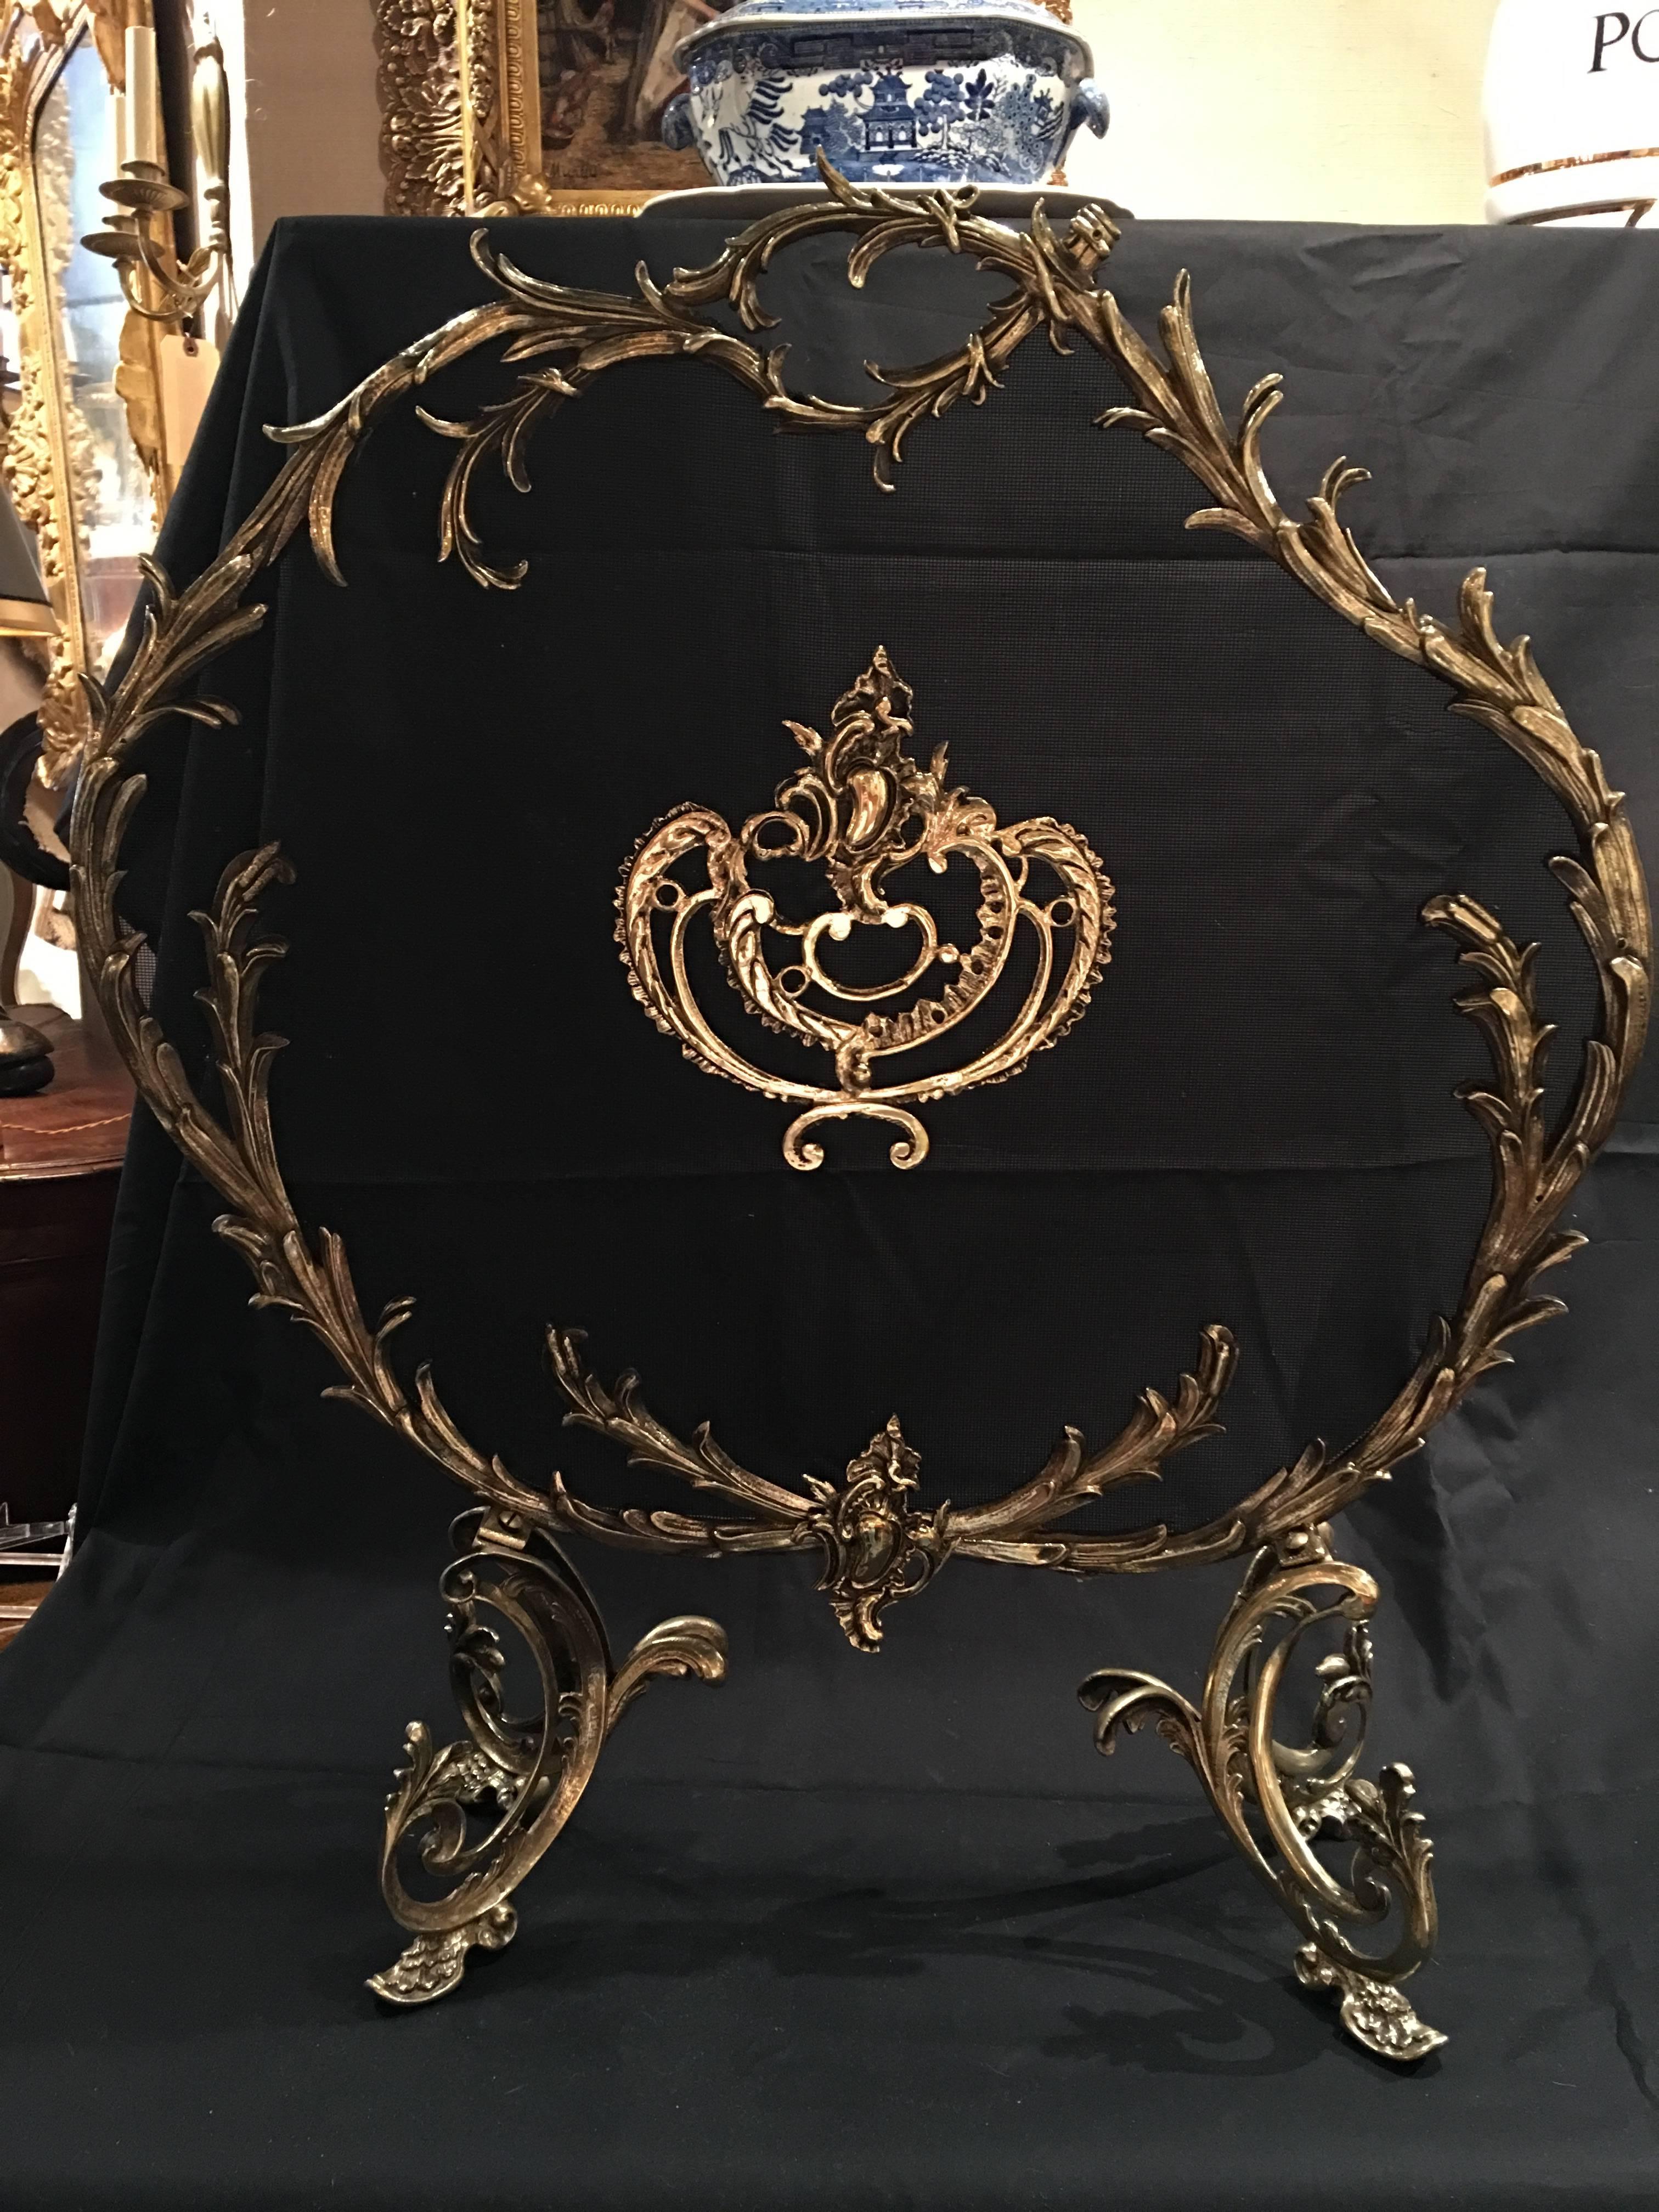 French polished brass fireplace screen with decorative medallion, 19th century.